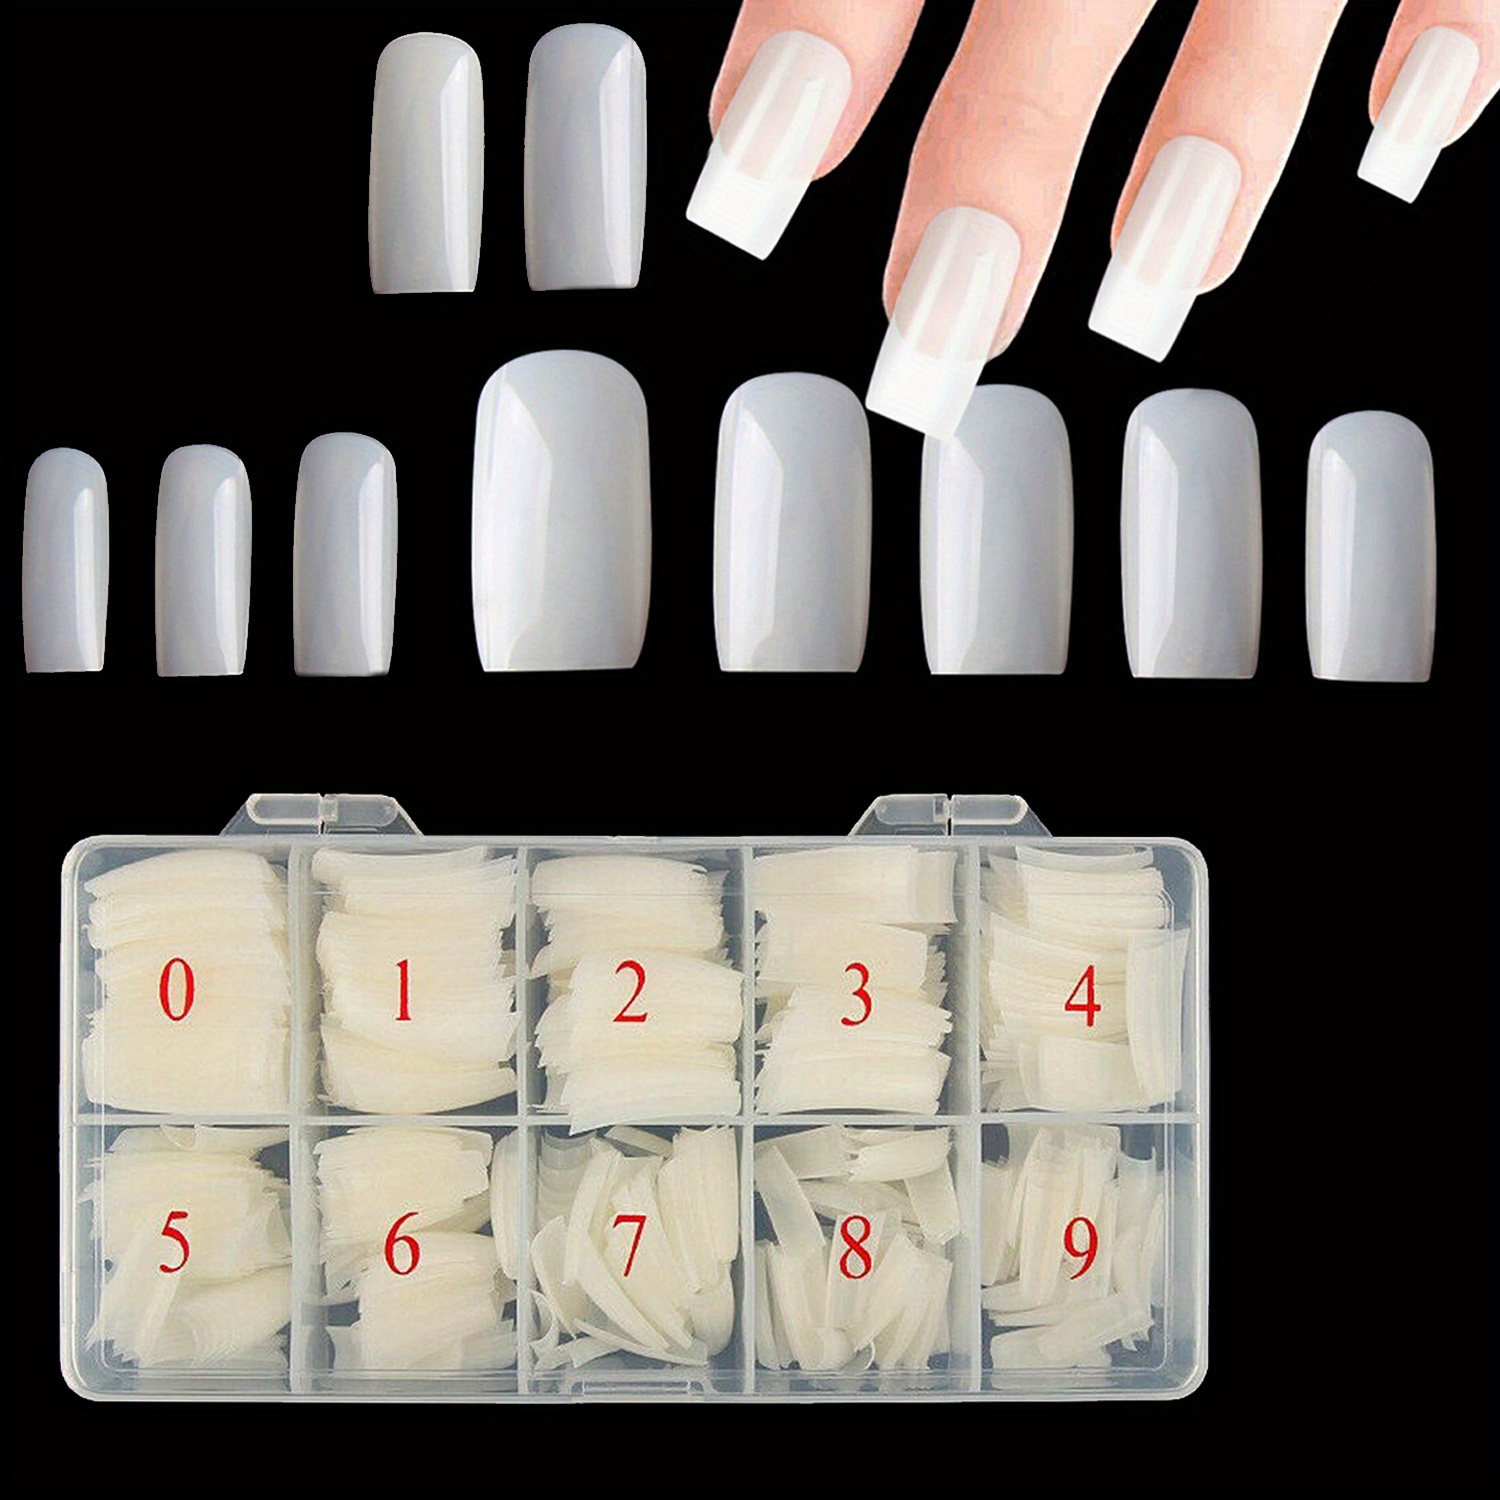 

500pcs Natural French Style False Nail Tips, Full Cover Acrylic Nail Set With Box, Assorted Sizes For Diy Manicure, Salon Quality Fake Nails, Easy Application